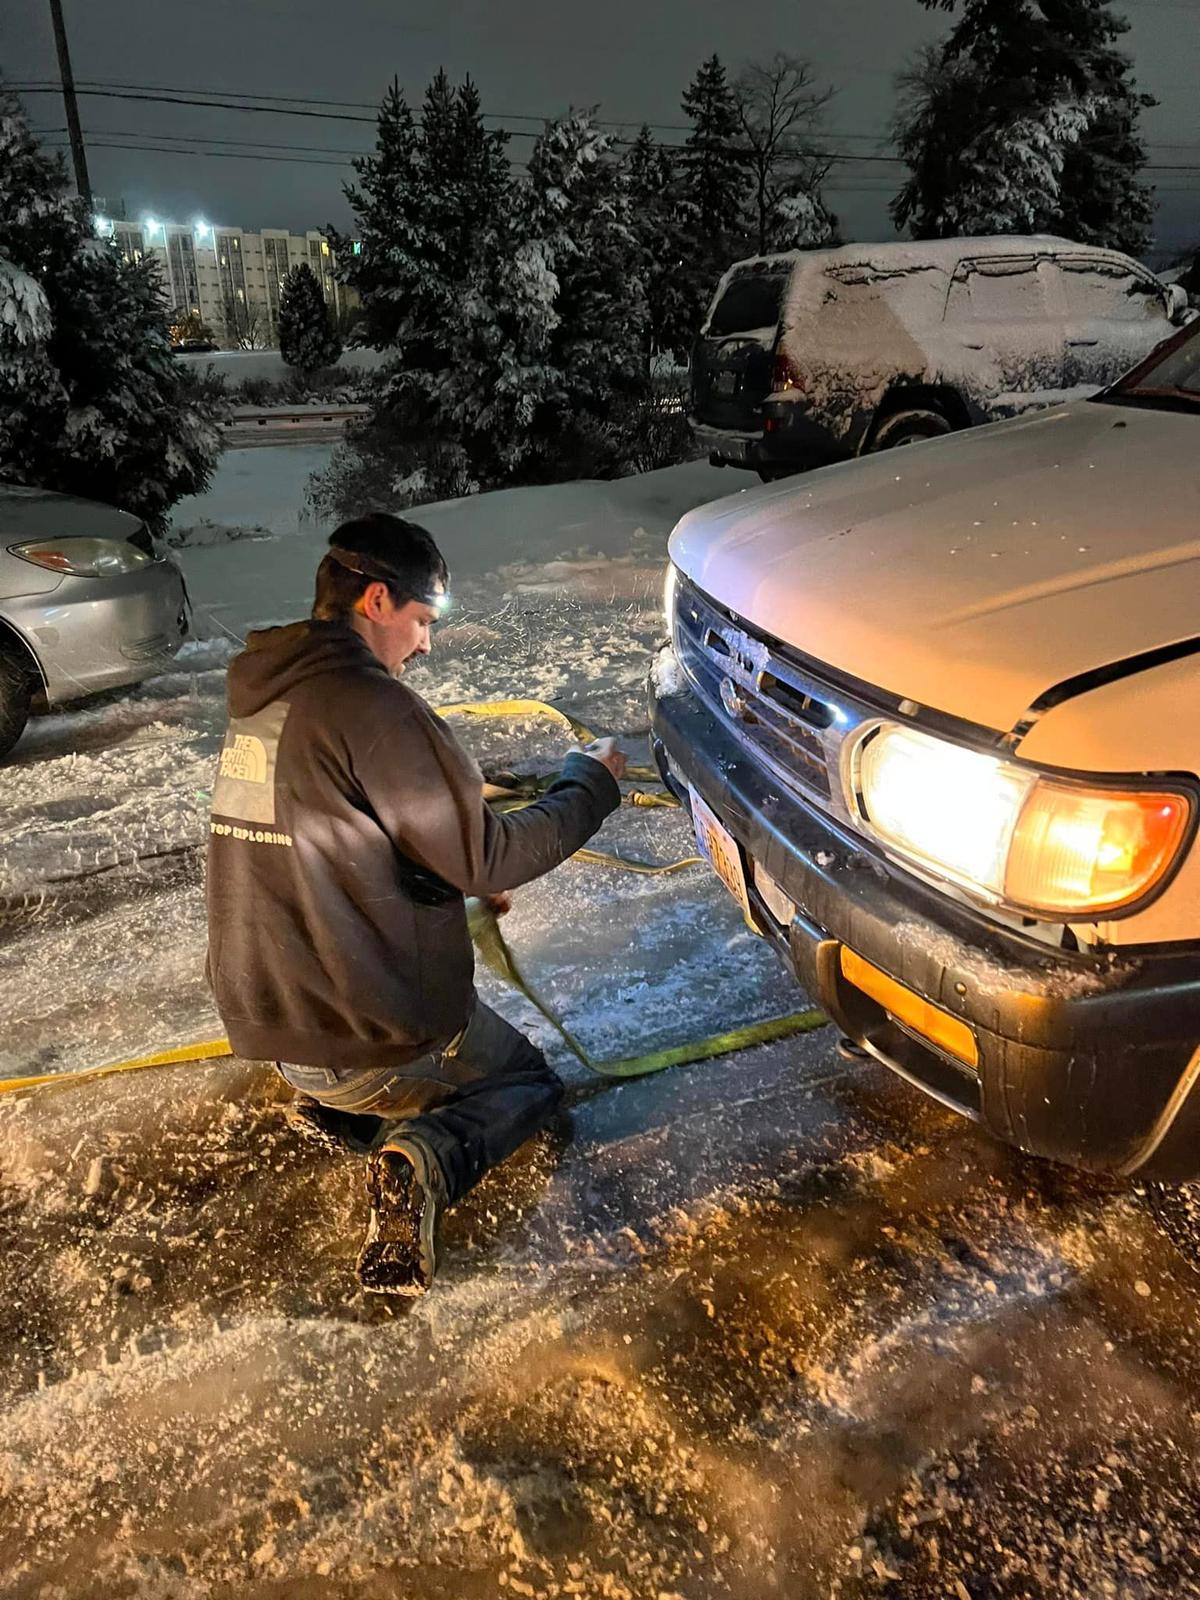 Gilbert fastening his tow straps in preparation to help haul a driver stuck on the icy road. (Courtesy of <a href="https://www.facebook.com/alec.higley">Alec Higley</a>)